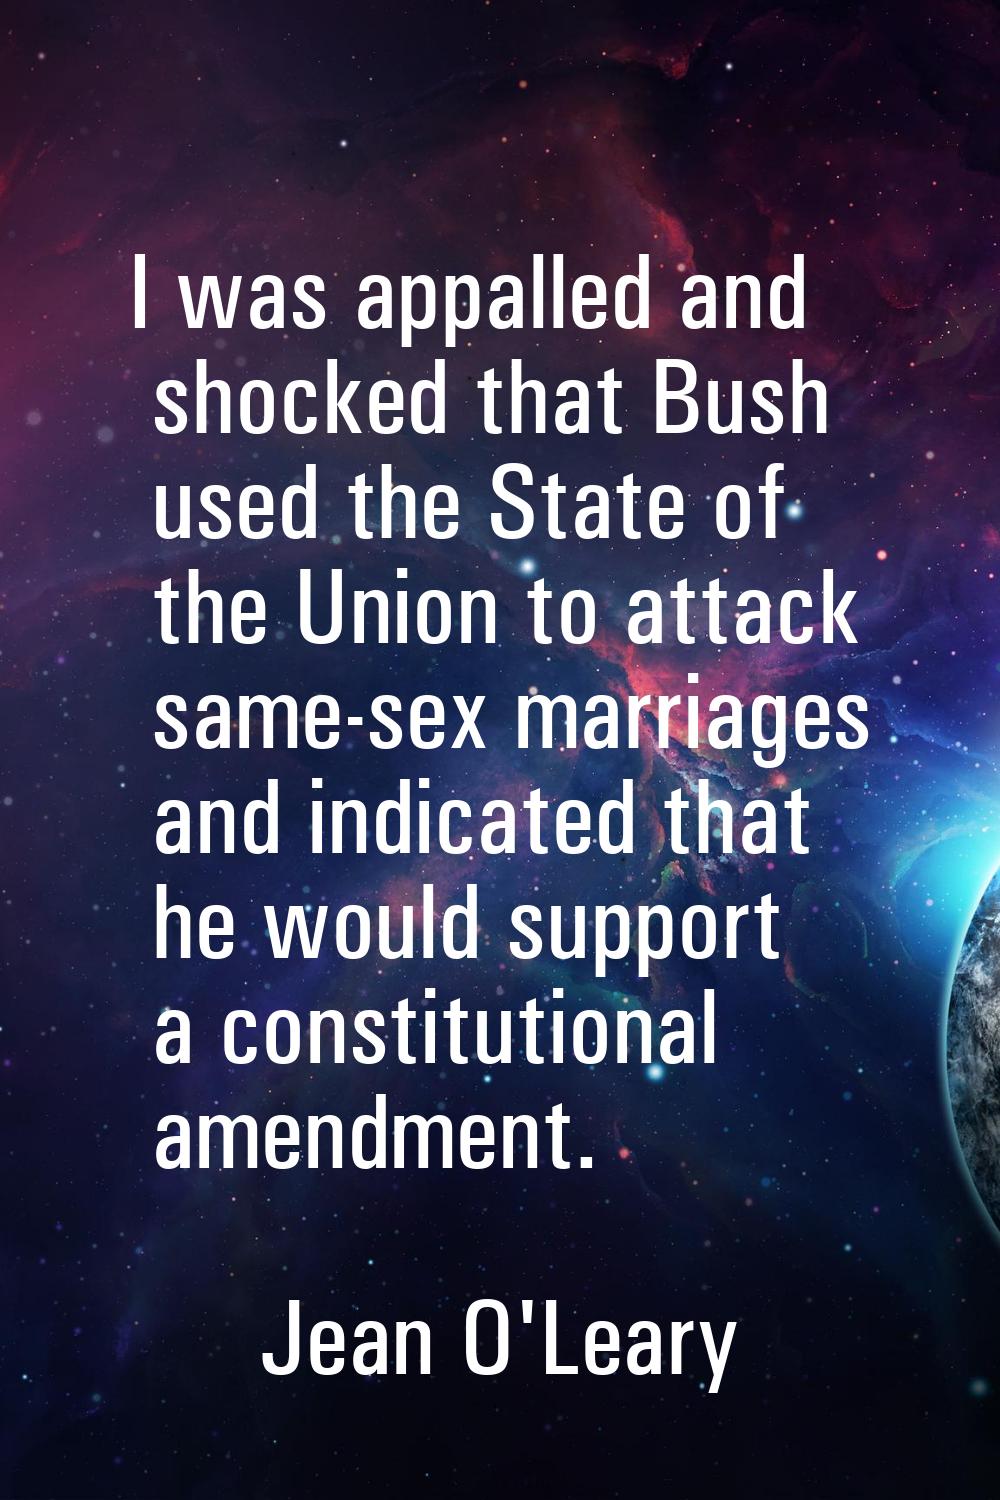 I was appalled and shocked that Bush used the State of the Union to attack same-sex marriages and i